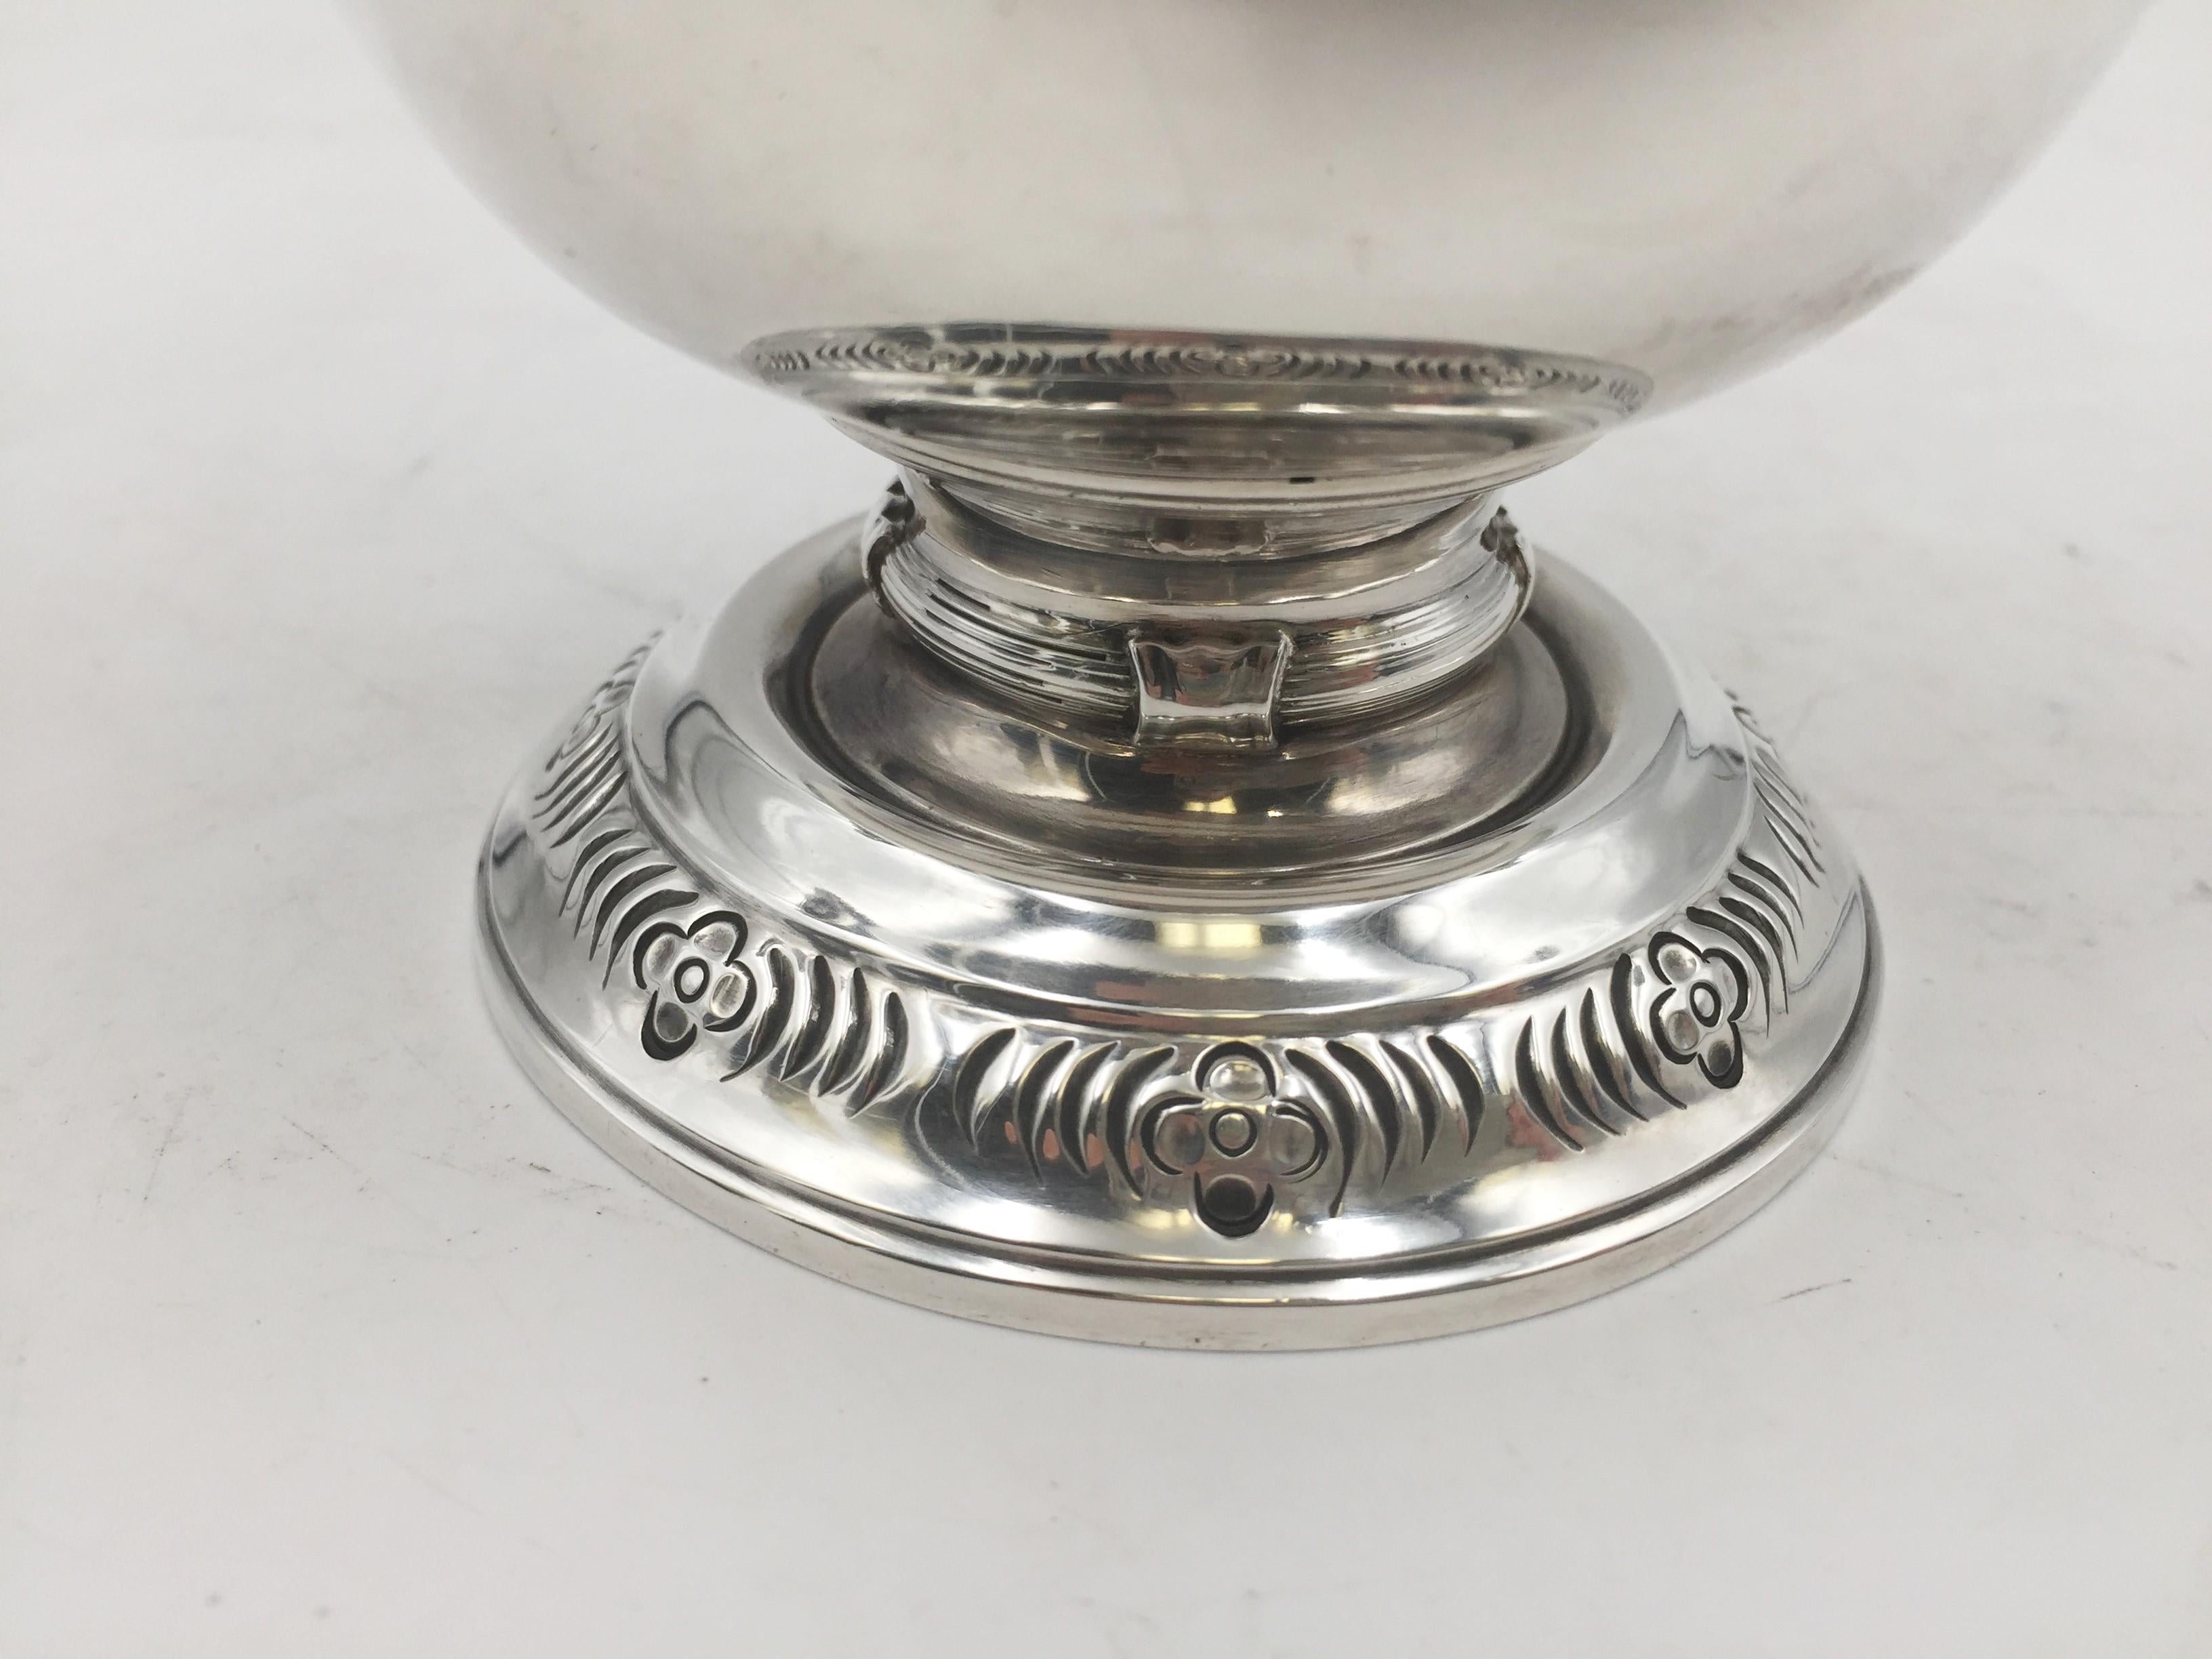 Elkington & Co. sterling silver trophy / centerpiece made in Birmingham, England in 1923 with engraved motifs on the base, ornate handles, applied band on the body, and a finial with animals and stylized natural motifs. It measures 8'' by 7 3/4''